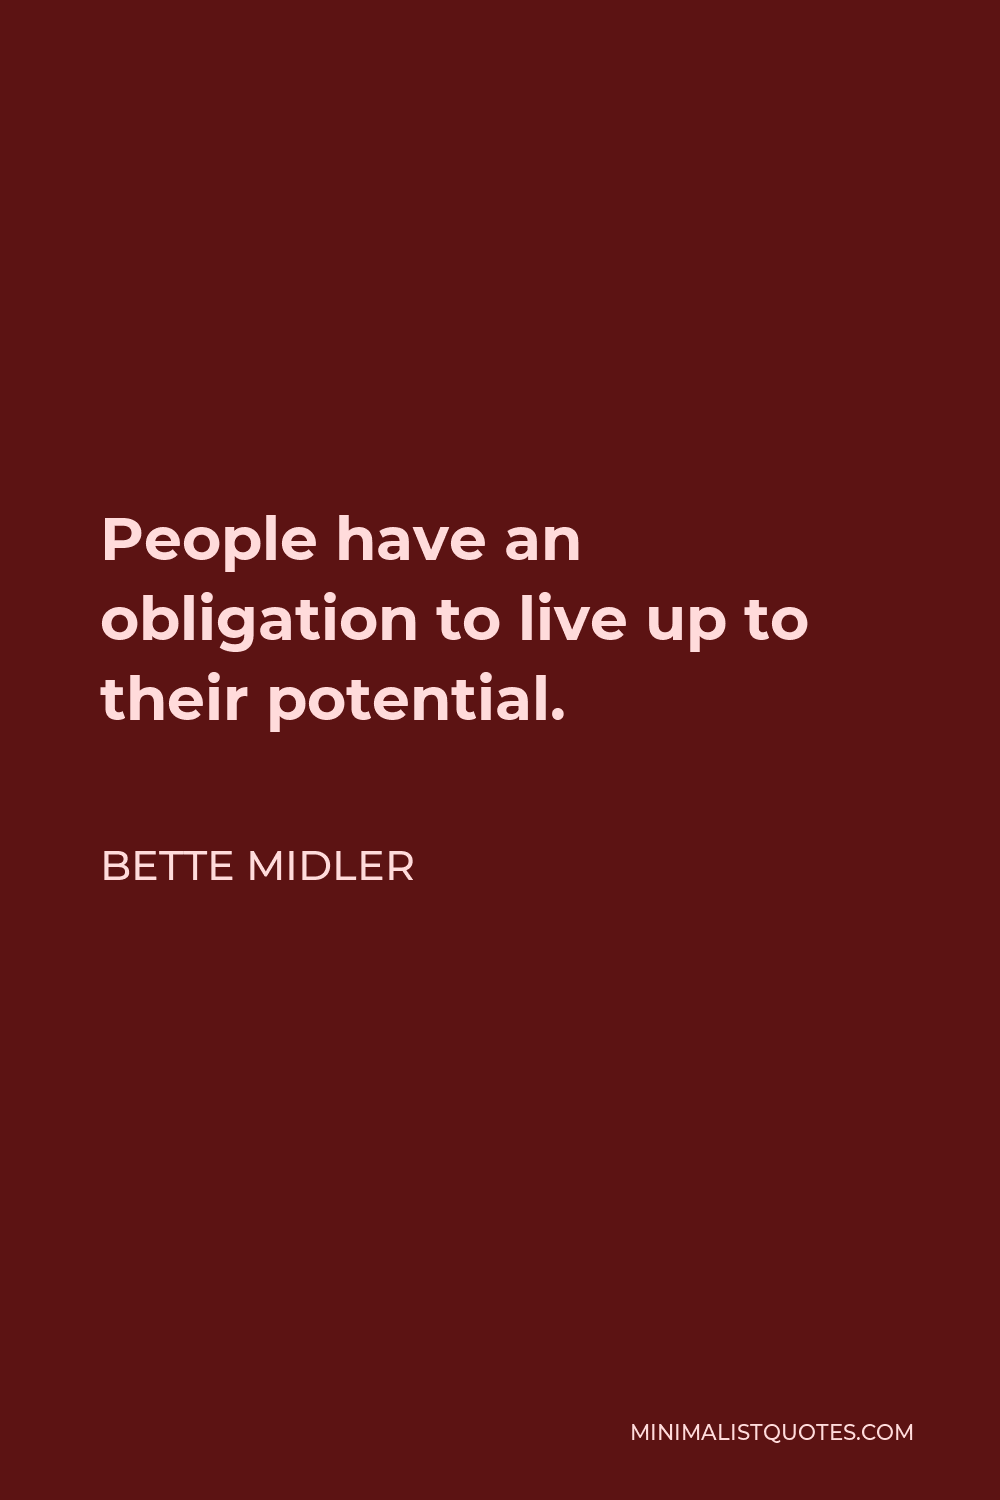 Bette Midler Quote - People have an obligation to live up to their potential.